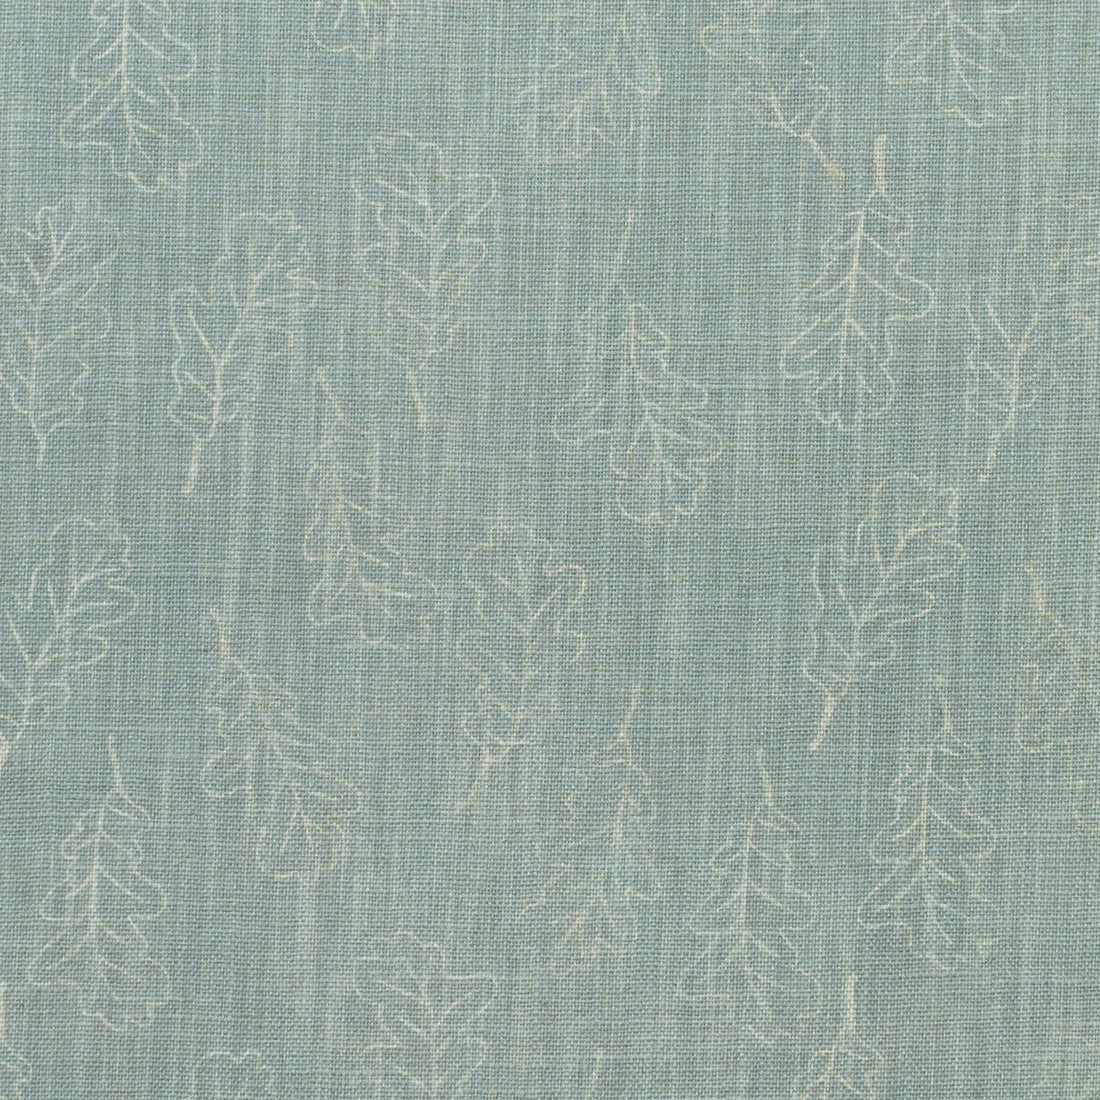 Noble Oak fabric in mist color - pattern AM100398.15.0 - by Kravet Couture in the Andrew Martin Woodland By Sophie Paterson collection